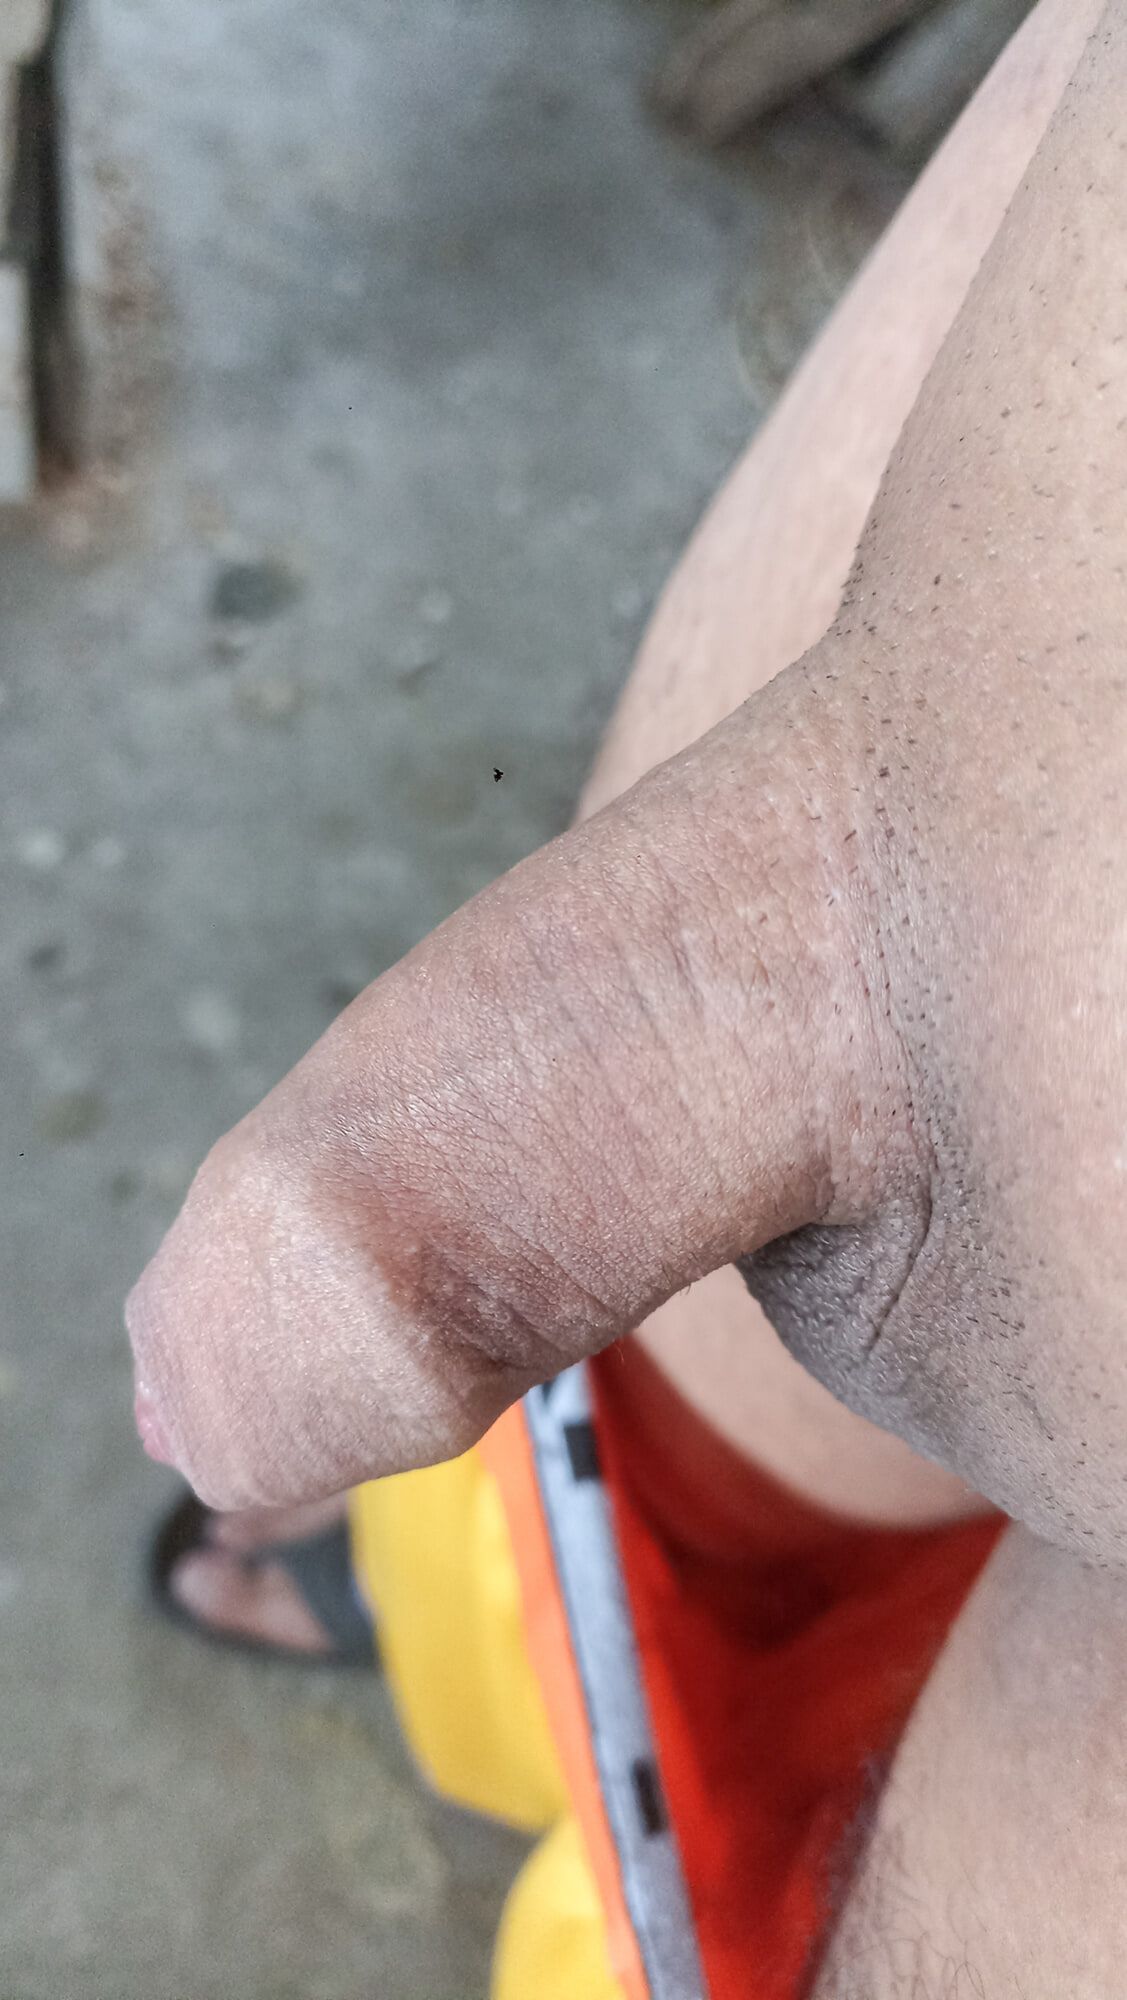 My little Flaccid Penis (without Erection) - Compilation 1 #10